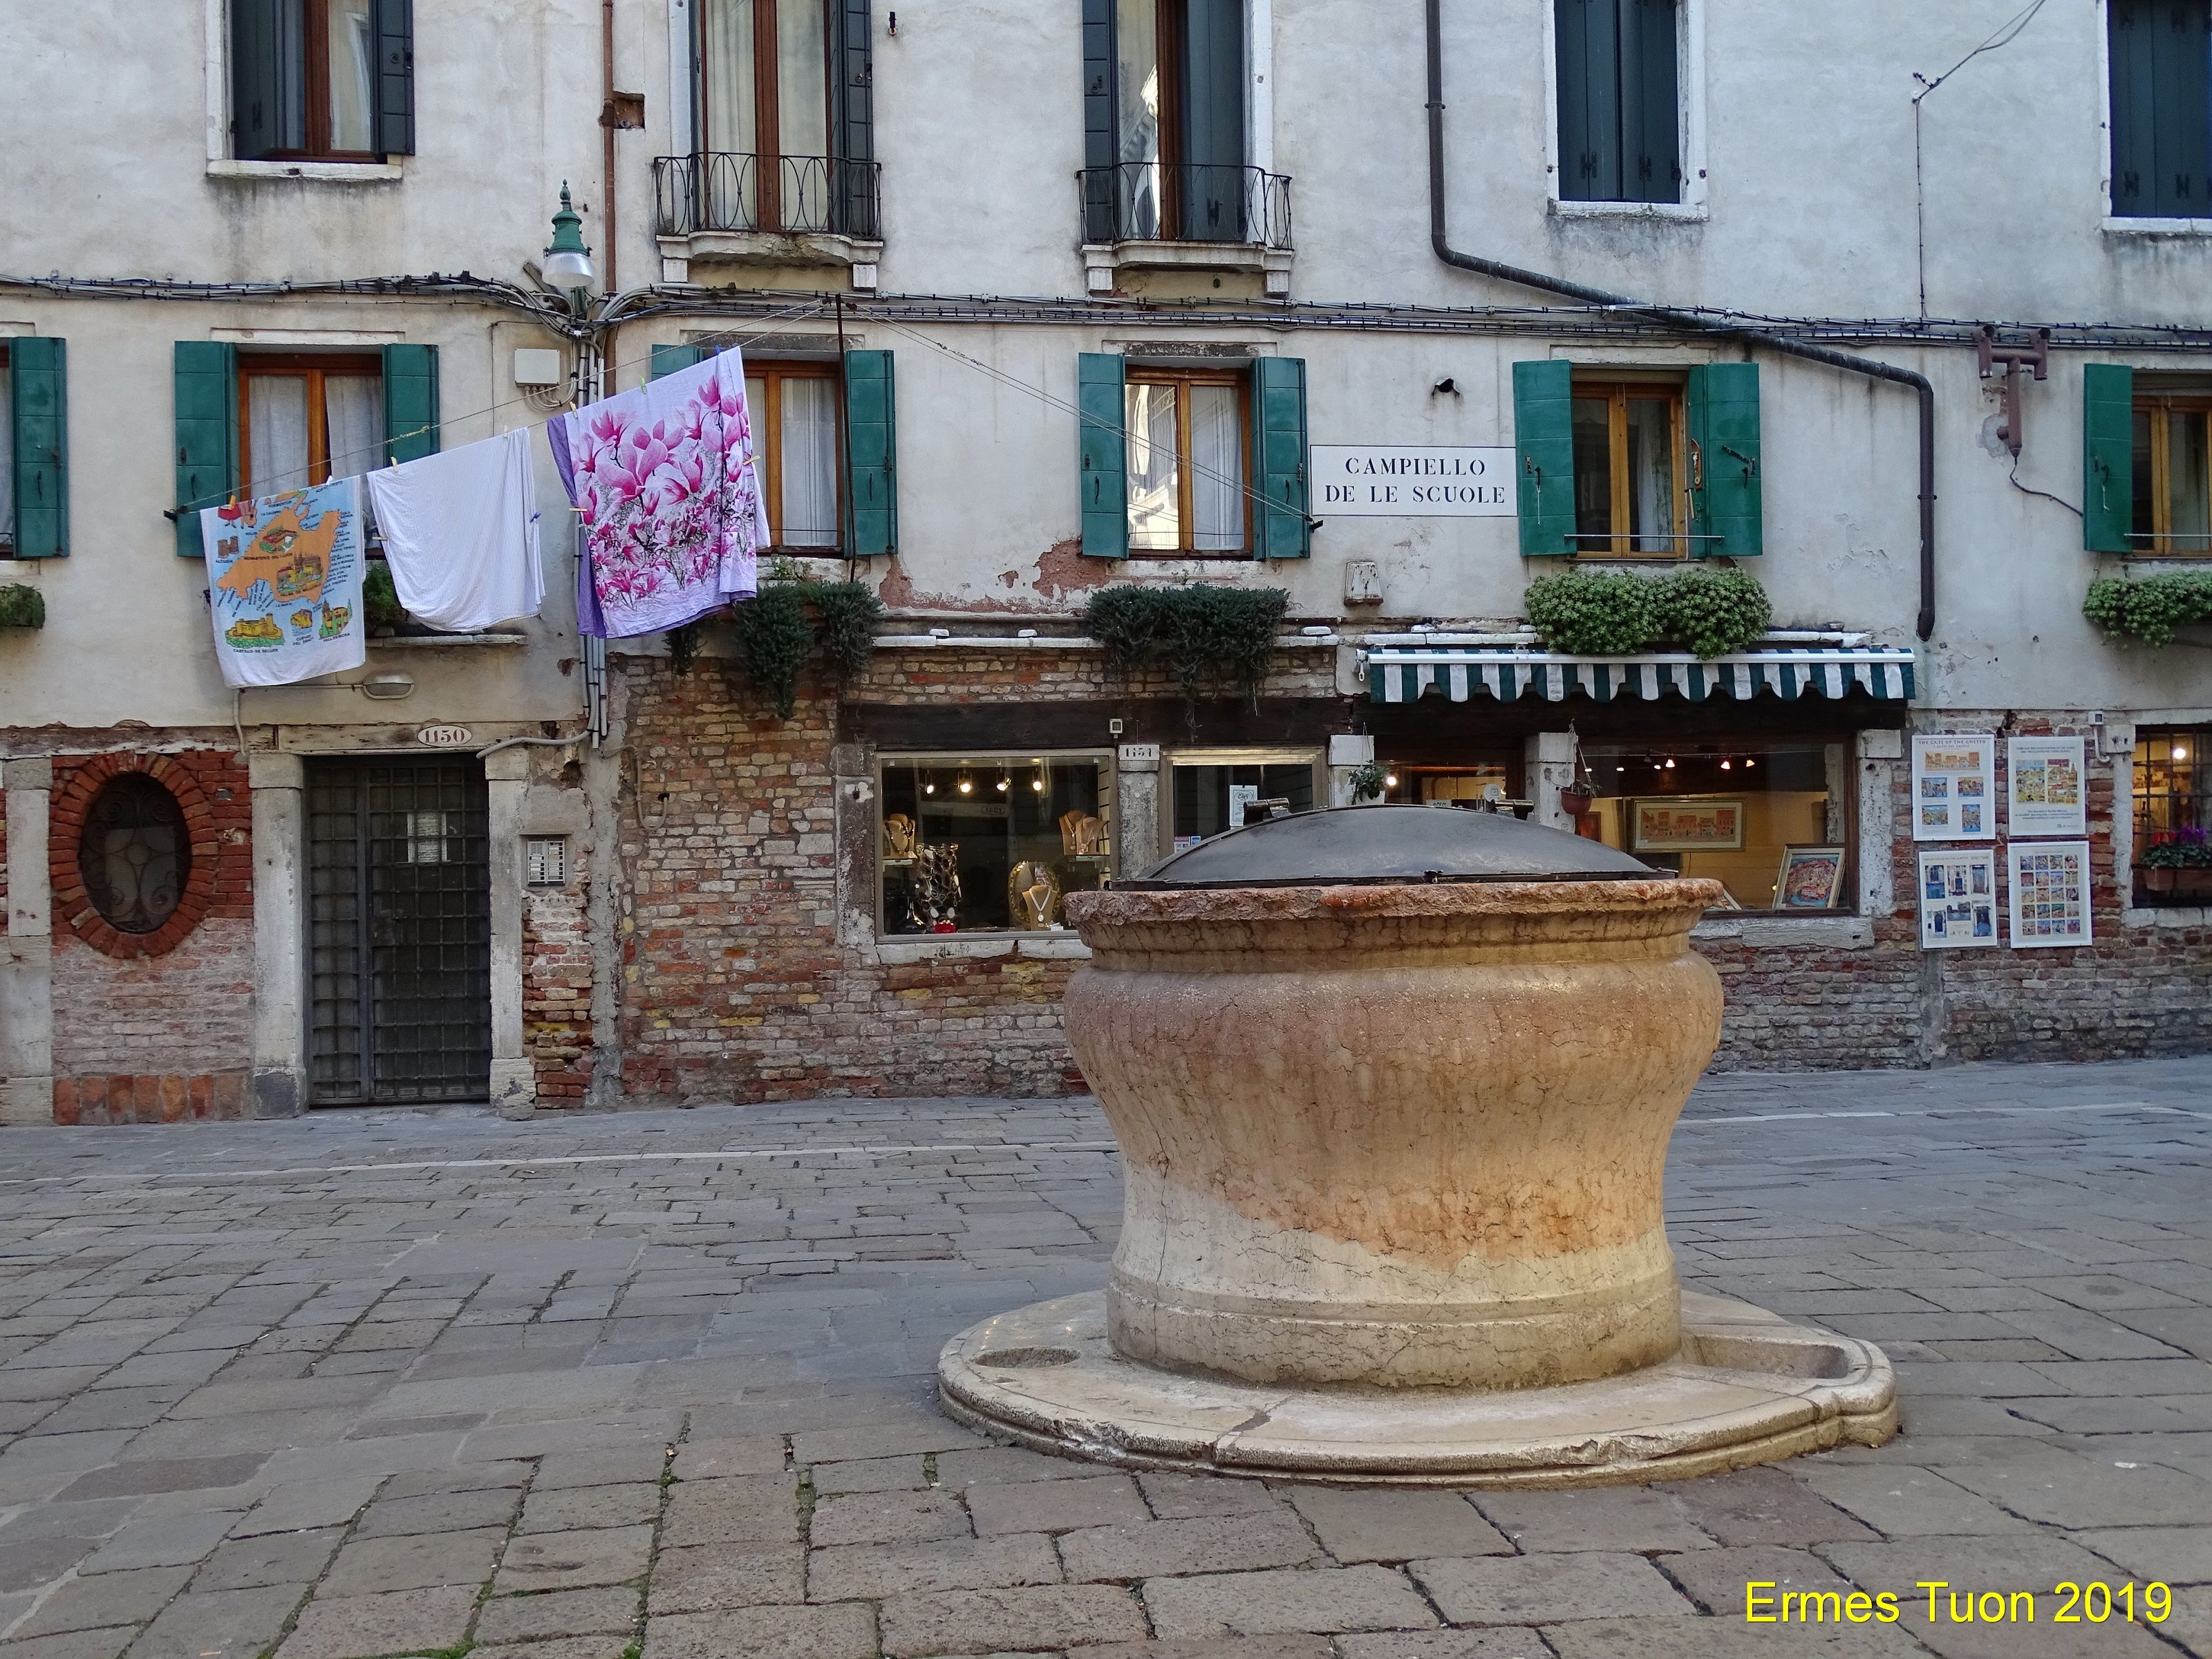 Caption: an ancient well on the Jewish ghetto - Venice - Local guide @ermest